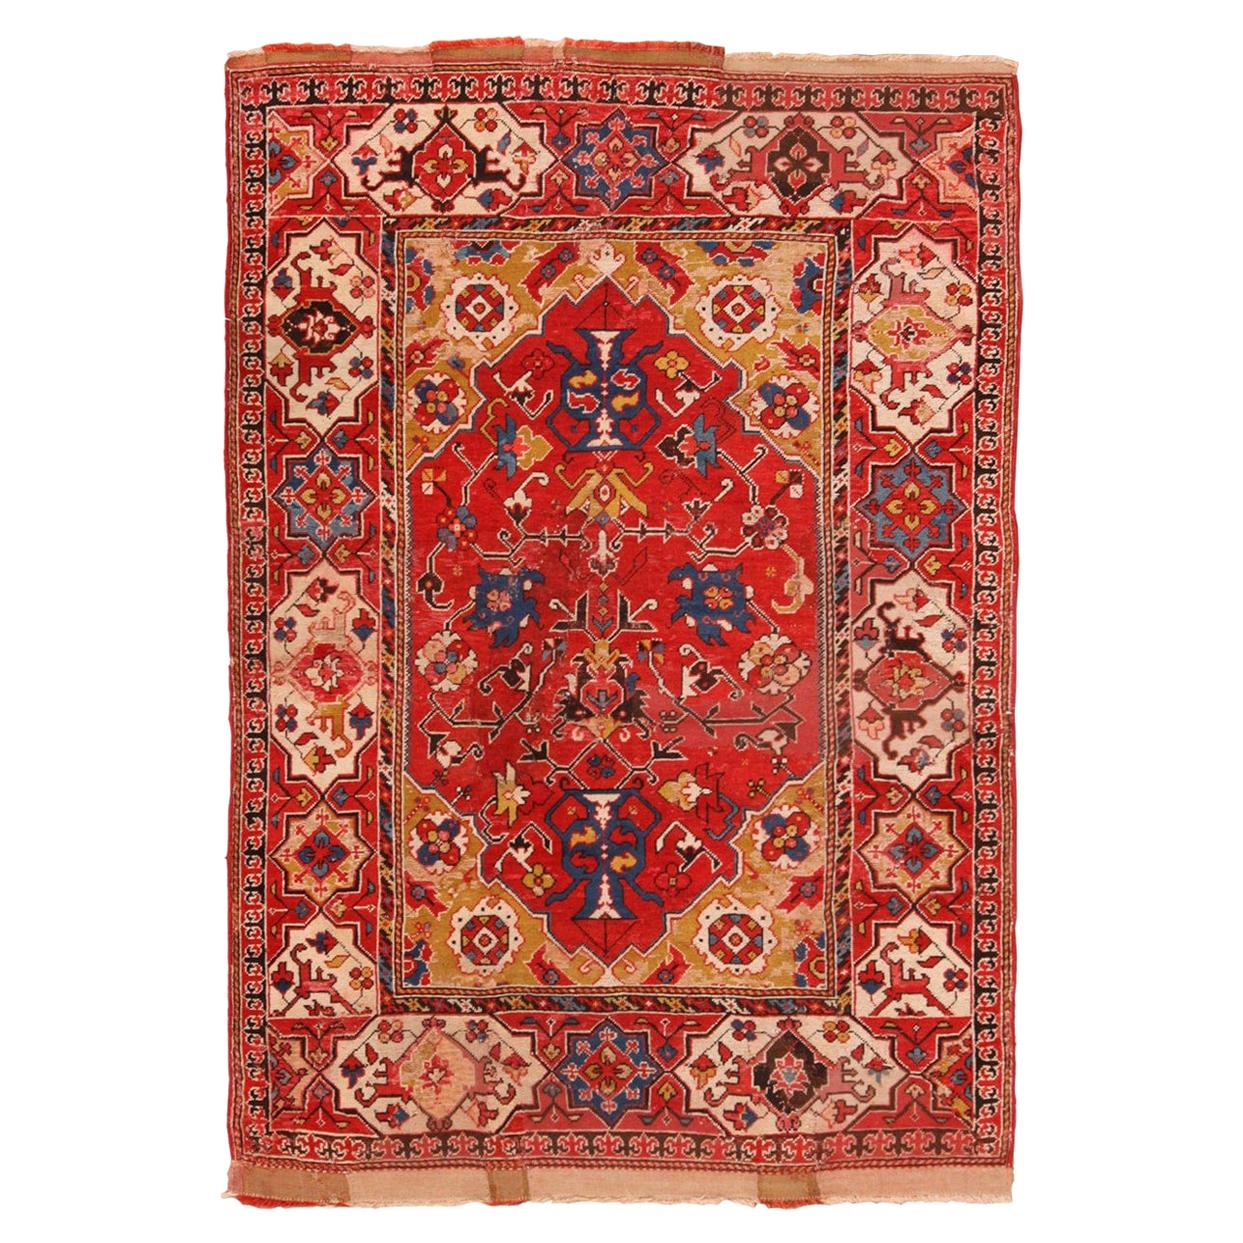 Nazmiyal Collection Antique 17th Century Rug. 3 ft 9 in x 5 ft 8 in